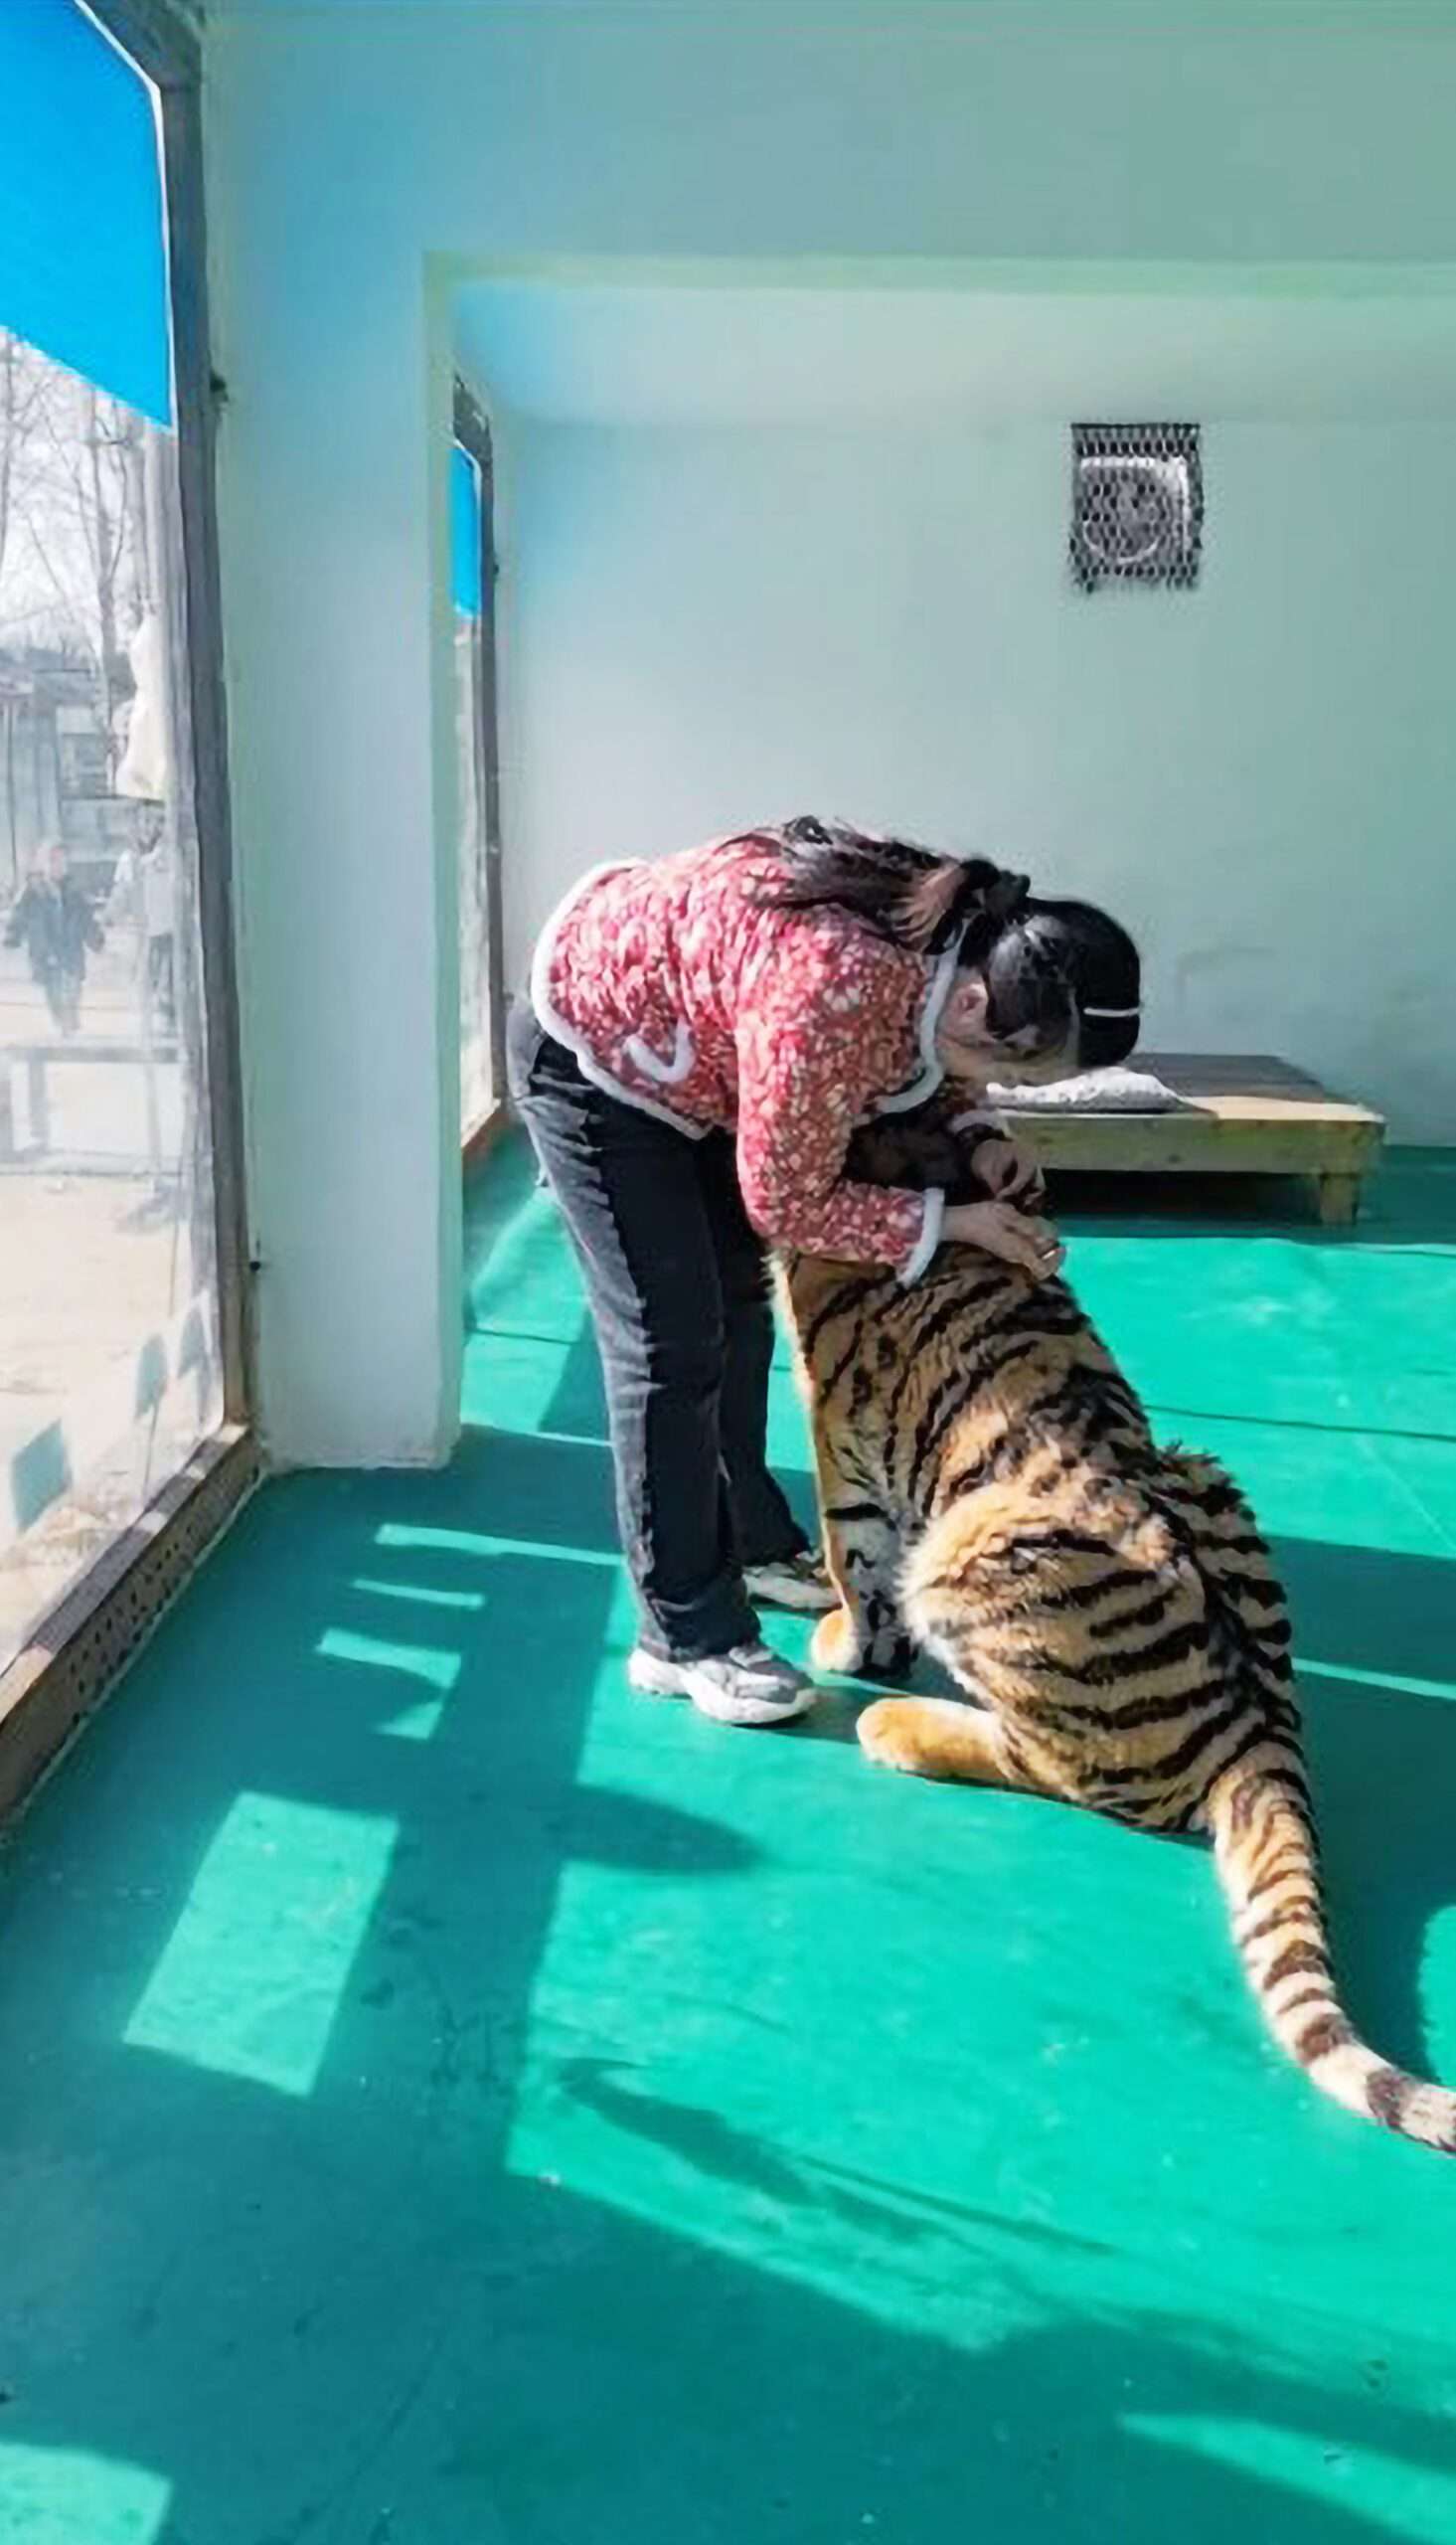 Read more about the article Rare Siberian Tiger Extends Its Paws For Hug Following Jab From Caretaker